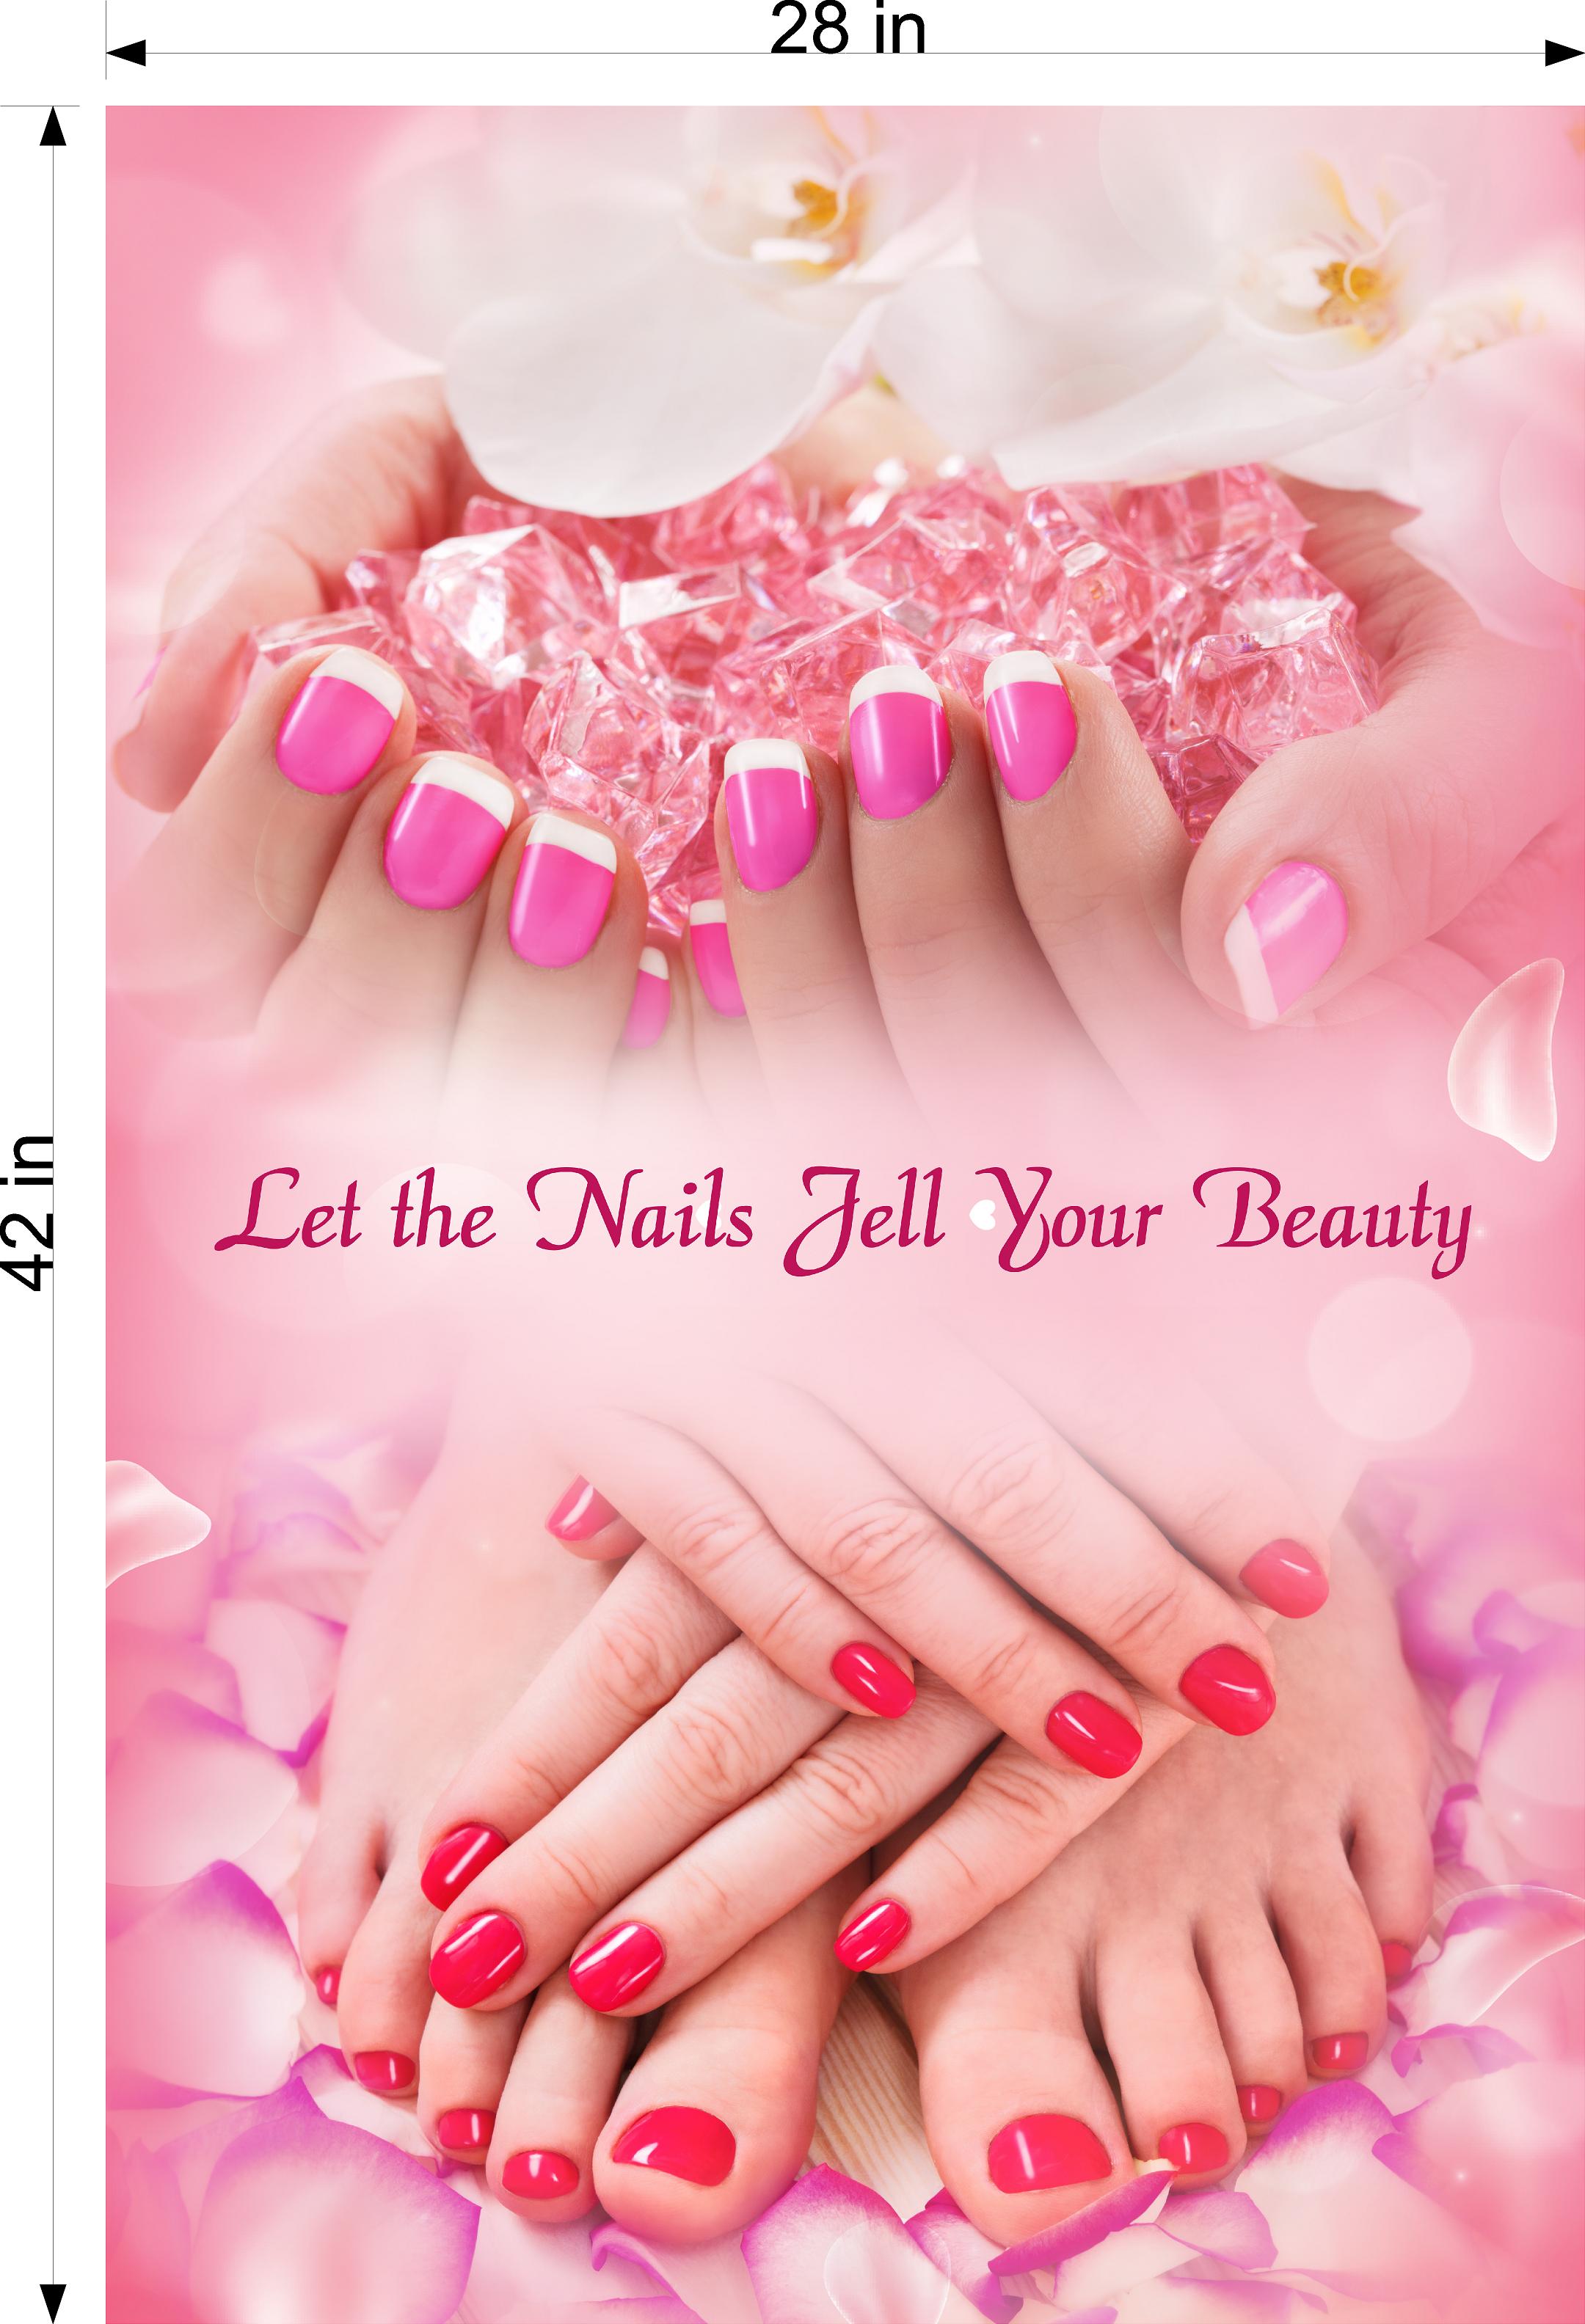 Airbrush Nails Posters for your Nail Salon. Get ANY THREE posters